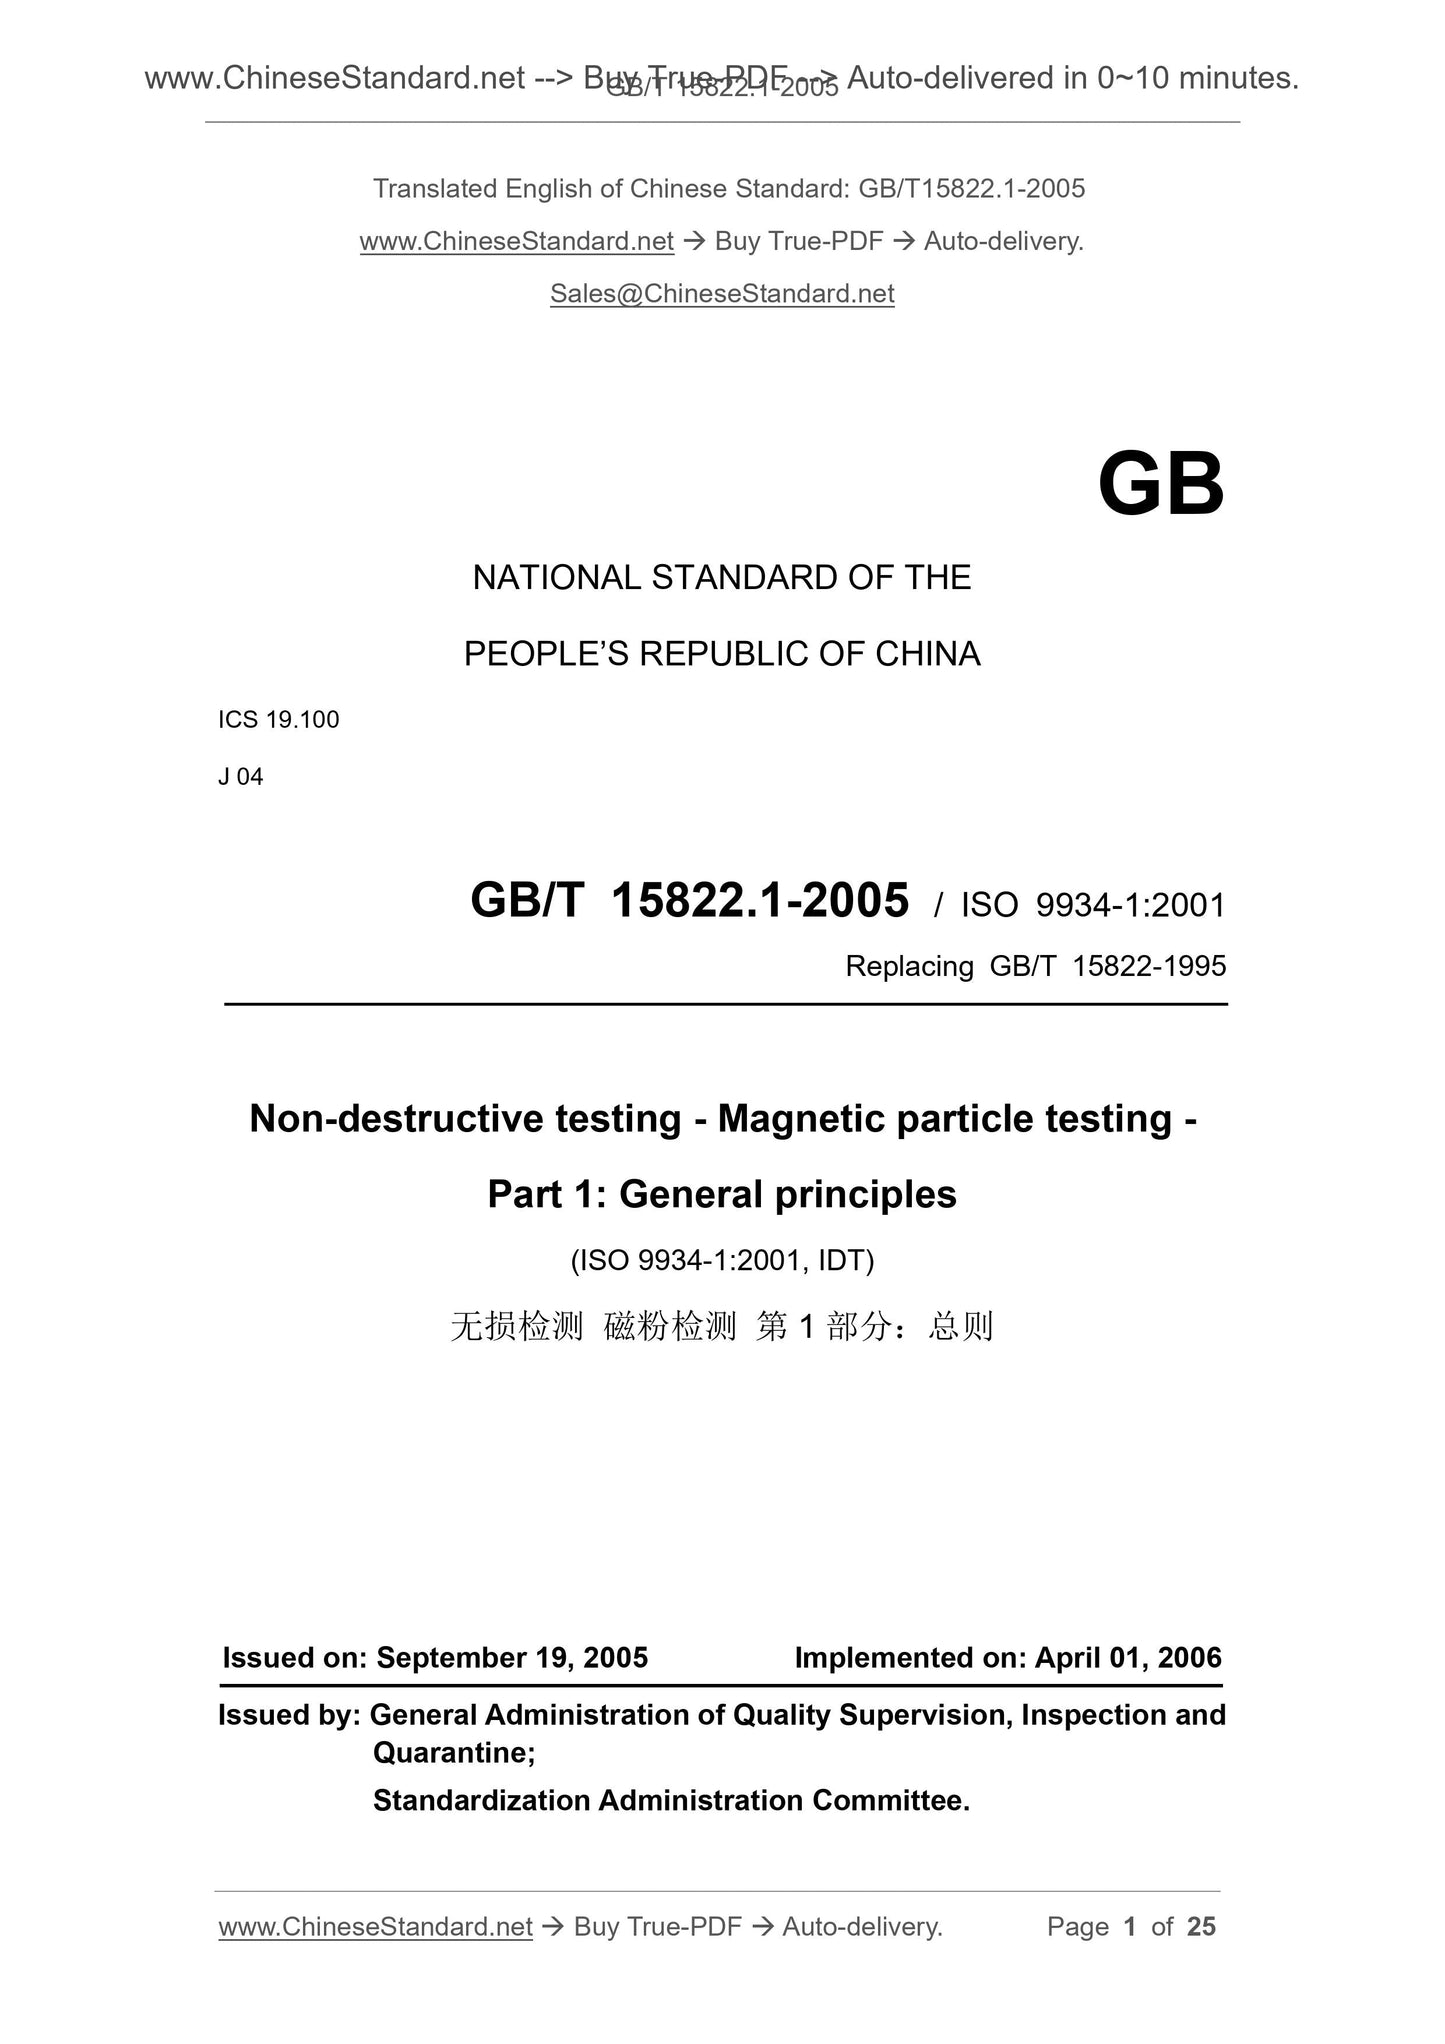 GB/T 15822.1-2005 Page 1